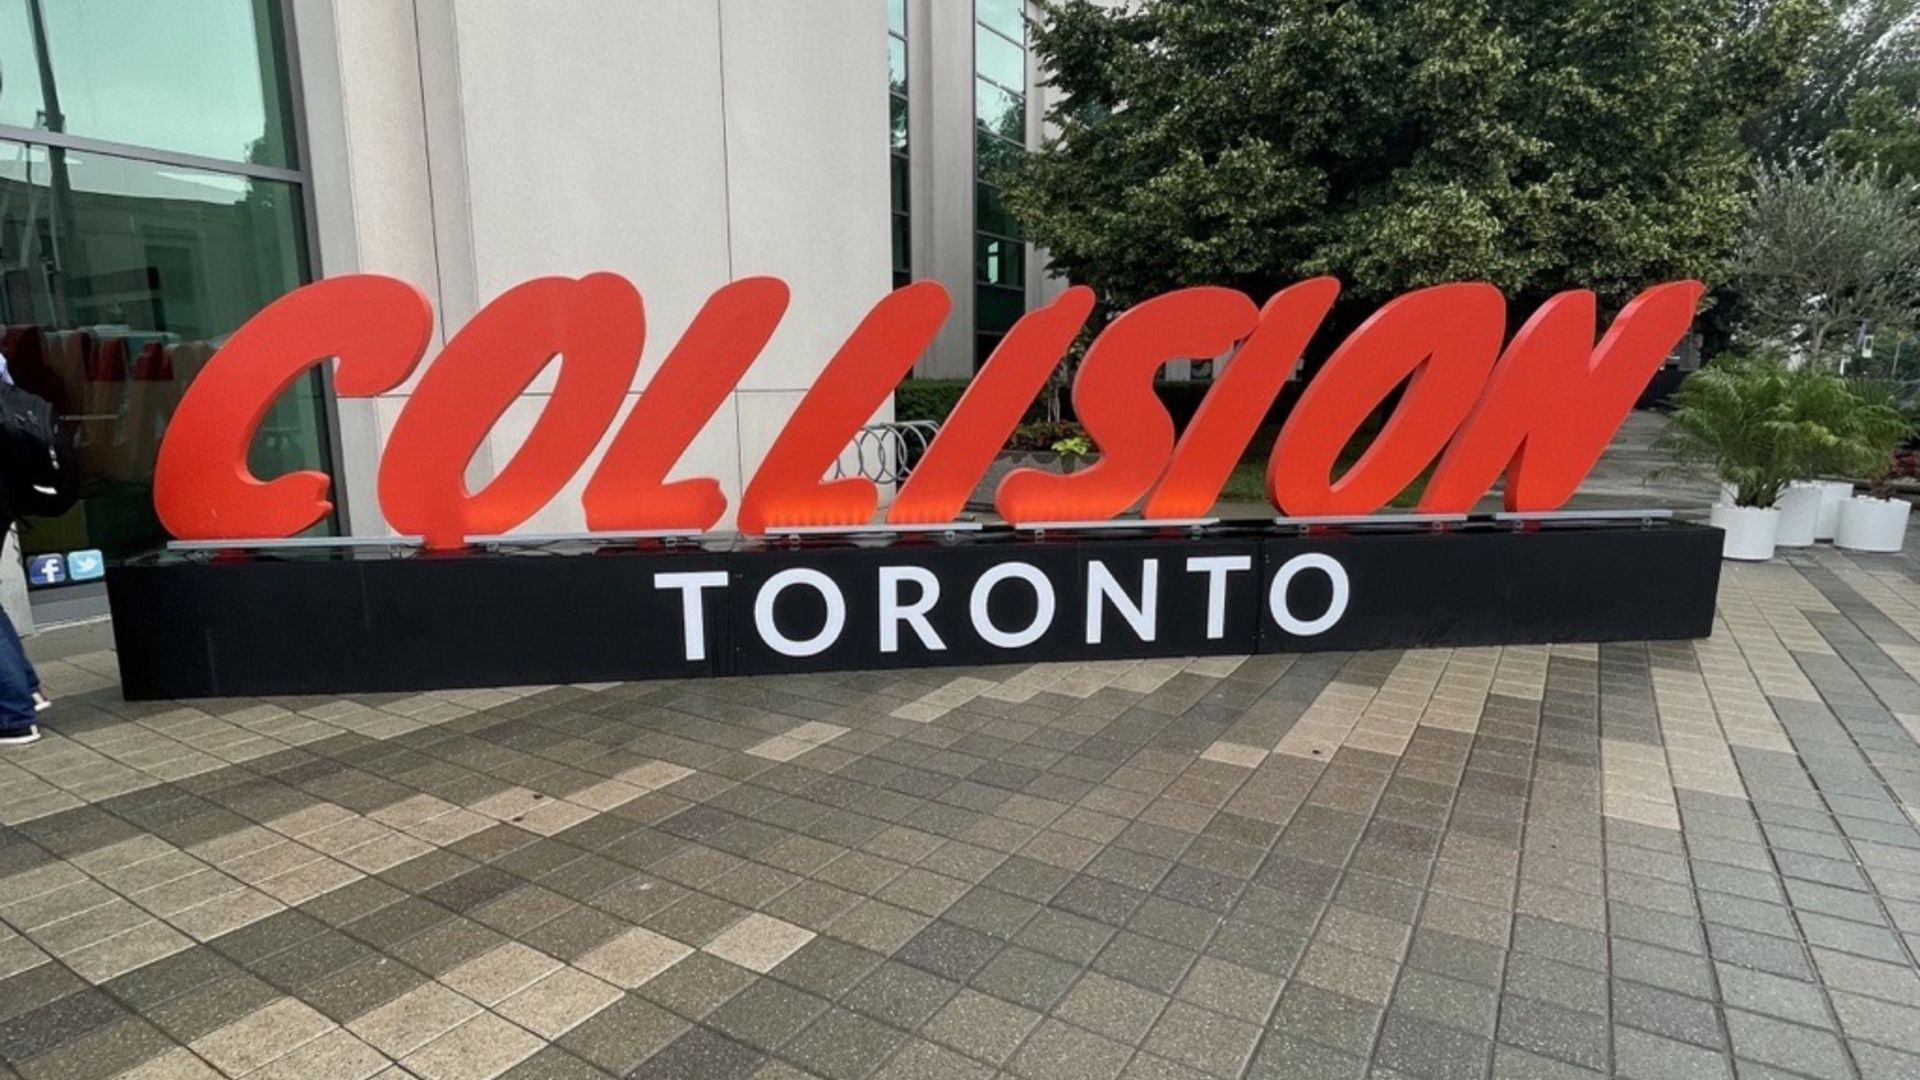 The Collision event sign outside of the event in Toronto.